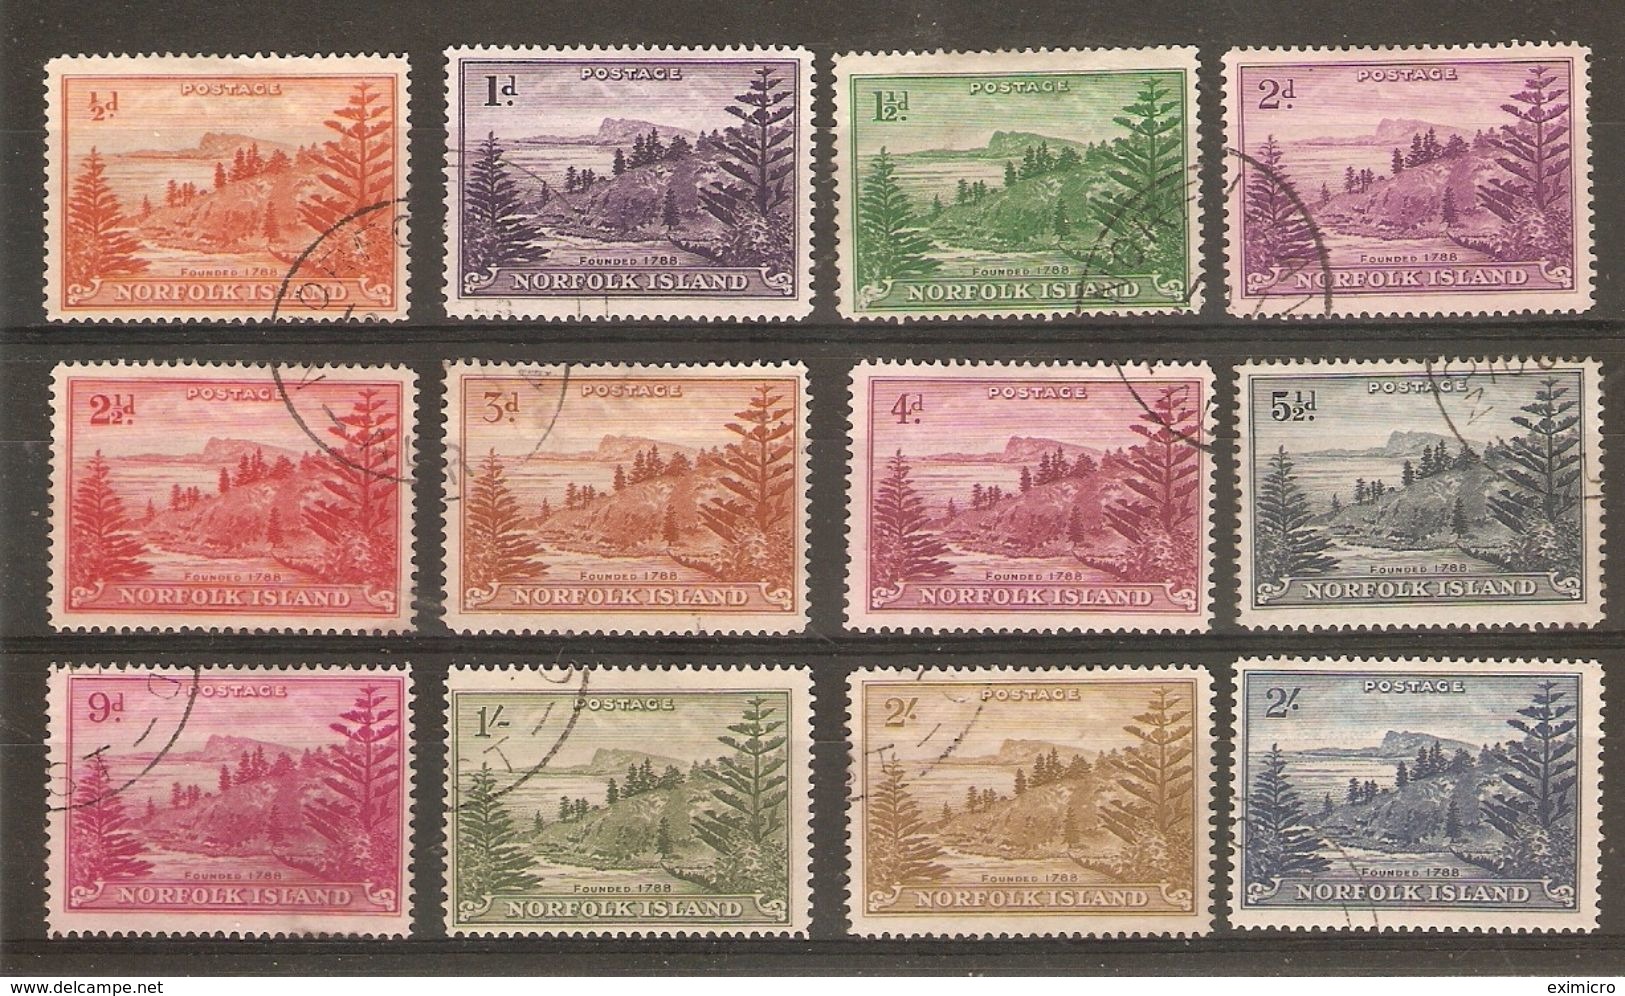 NORFOLK ISLAND 1947 - 1949 SET SG 1/12a (ex SG 6a,9) FINE USED - UNCHECKED FOR WHITE PAPER ISSUES!!! - Norfolk Eiland